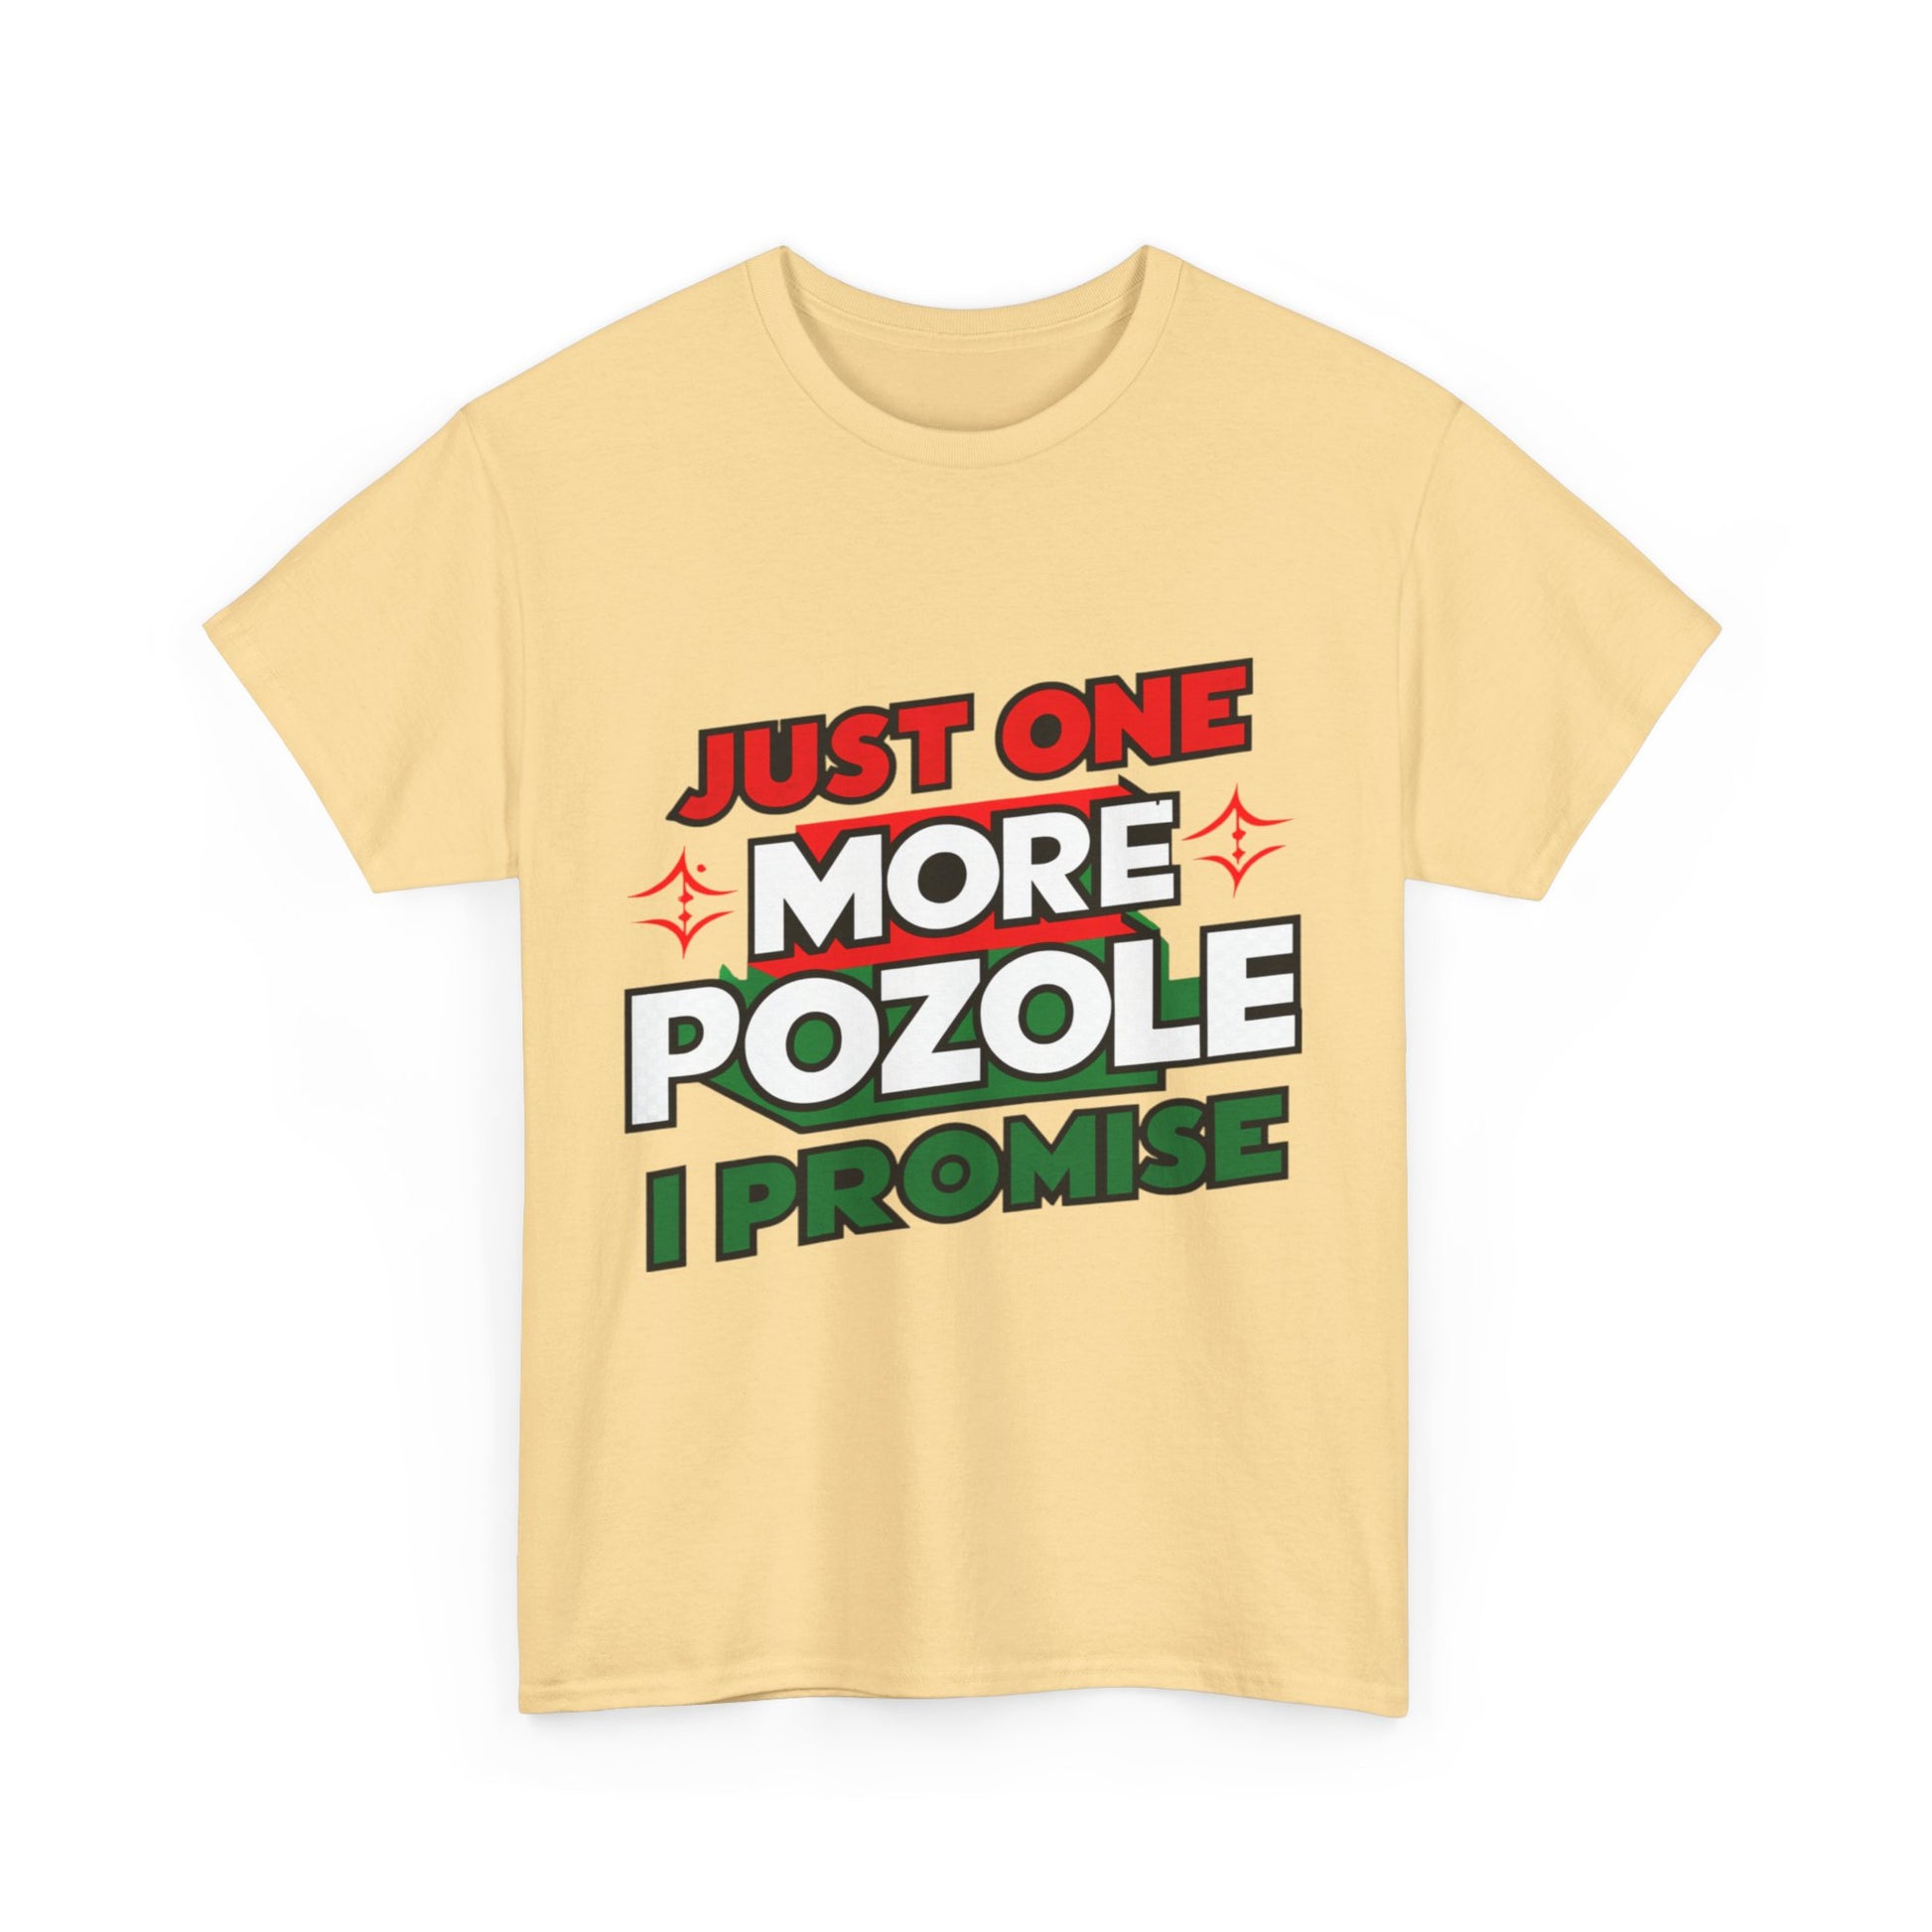 Just One More Pozole I Promise Mexican Food Graphic Unisex Heavy Cotton Tee Cotton Funny Humorous Graphic Soft Premium Unisex Men Women Yellow Haze T-shirt Birthday Gift-45